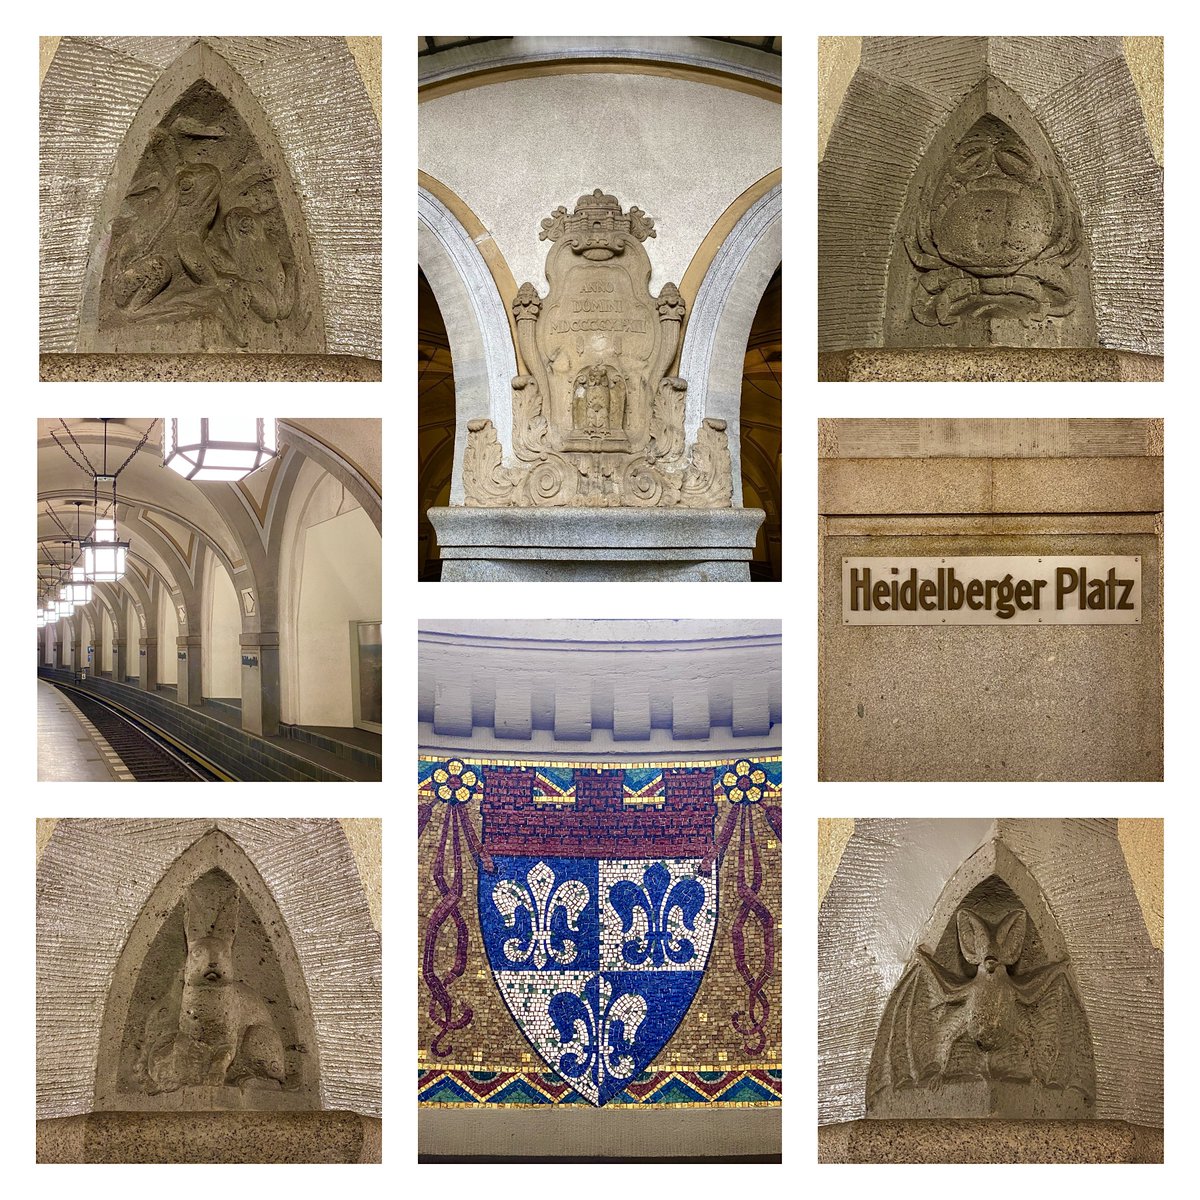 Wealth and prosperity is what Heidelberger Platz station, a U-Bahn station from 1913 in what is now the district of Wilmersdorf, exudes.